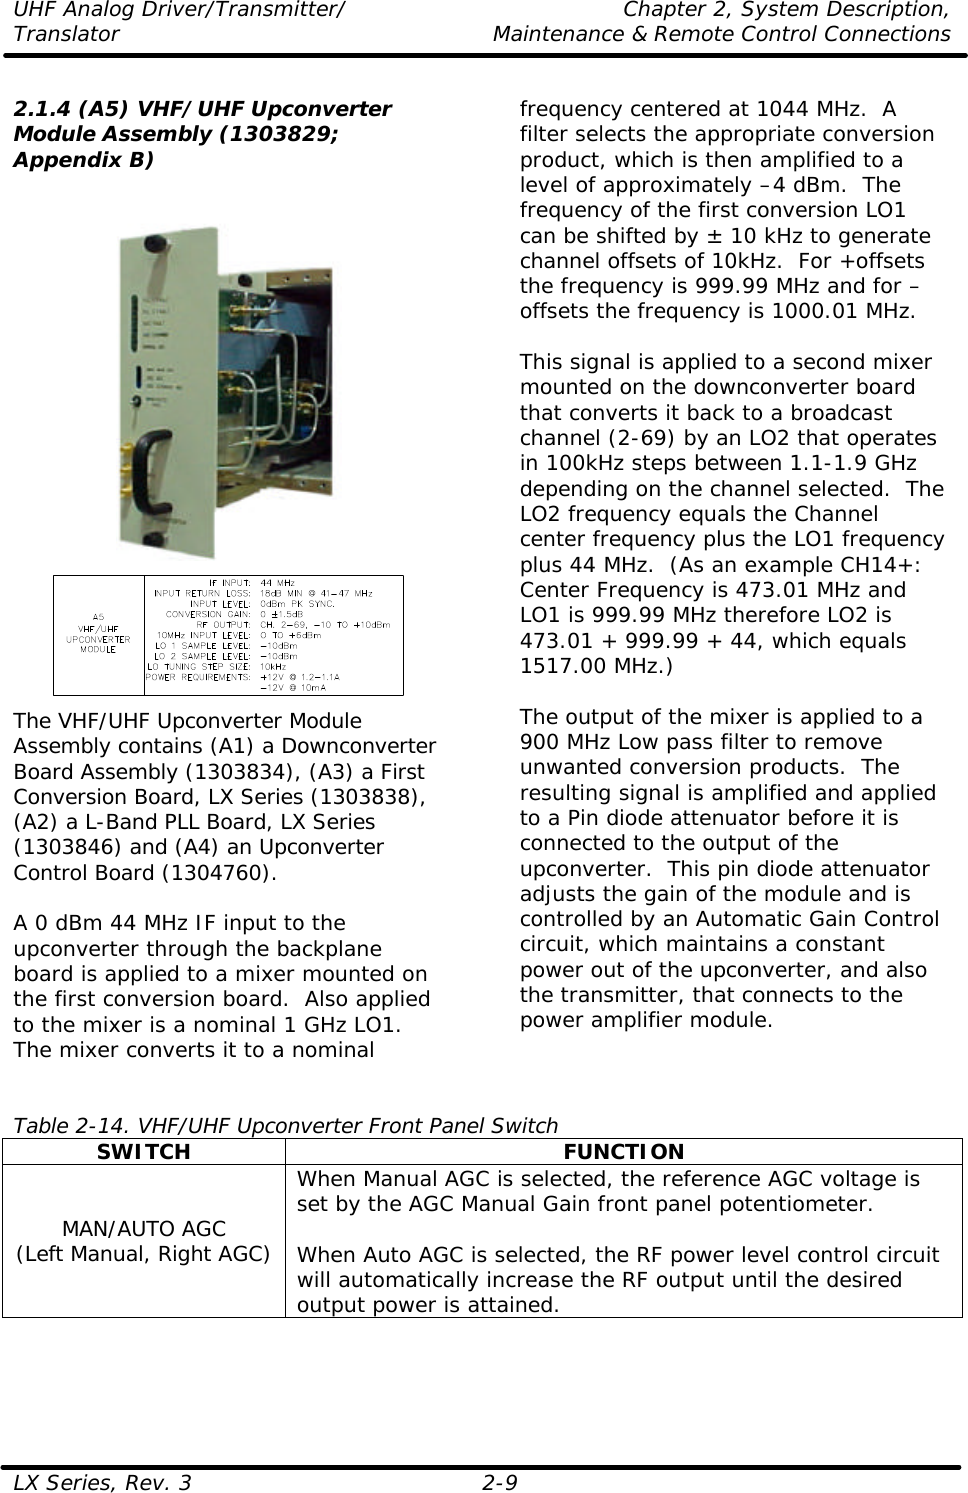 UHF Analog Driver/Transmitter/ Chapter 2, System Description, Translator Maintenance &amp; Remote Control Connections LX Series, Rev. 3 2-9  2.1.4 (A5) VHF/UHF Upconverter Module Assembly (1303829; Appendix B)     The VHF/UHF Upconverter Module Assembly contains (A1) a Downconverter Board Assembly (1303834), (A3) a First Conversion Board, LX Series (1303838), (A2) a L-Band PLL Board, LX Series (1303846) and (A4) an Upconverter Control Board (1304760).  A 0 dBm 44 MHz IF input to the upconverter through the backplane board is applied to a mixer mounted on the first conversion board.  Also applied to the mixer is a nominal 1 GHz LO1.  The mixer converts it to a nominal frequency centered at 1044 MHz.  A filter selects the appropriate conversion product, which is then amplified to a level of approximately –4 dBm.  The frequency of the first conversion LO1 can be shifted by ± 10 kHz to generate channel offsets of 10kHz.  For +offsets the frequency is 999.99 MHz and for –offsets the frequency is 1000.01 MHz.  This signal is applied to a second mixer mounted on the downconverter board that converts it back to a broadcast channel (2-69) by an LO2 that operates in 100kHz steps between 1.1-1.9 GHz depending on the channel selected.  The LO2 frequency equals the Channel center frequency plus the LO1 frequency plus 44 MHz.  (As an example CH14+: Center Frequency is 473.01 MHz and LO1 is 999.99 MHz therefore LO2 is 473.01 + 999.99 + 44, which equals 1517.00 MHz.)  The output of the mixer is applied to a 900 MHz Low pass filter to remove unwanted conversion products.  The resulting signal is amplified and applied to a Pin diode attenuator before it is connected to the output of the upconverter.  This pin diode attenuator adjusts the gain of the module and is controlled by an Automatic Gain Control circuit, which maintains a constant power out of the upconverter, and also the transmitter, that connects to the power amplifier module.   Table 2-14. VHF/UHF Upconverter Front Panel Switch SWITCH FUNCTION MAN/AUTO AGC (Left Manual, Right AGC) When Manual AGC is selected, the reference AGC voltage is set by the AGC Manual Gain front panel potentiometer.   When Auto AGC is selected, the RF power level control circuit will automatically increase the RF output until the desired output power is attained. 